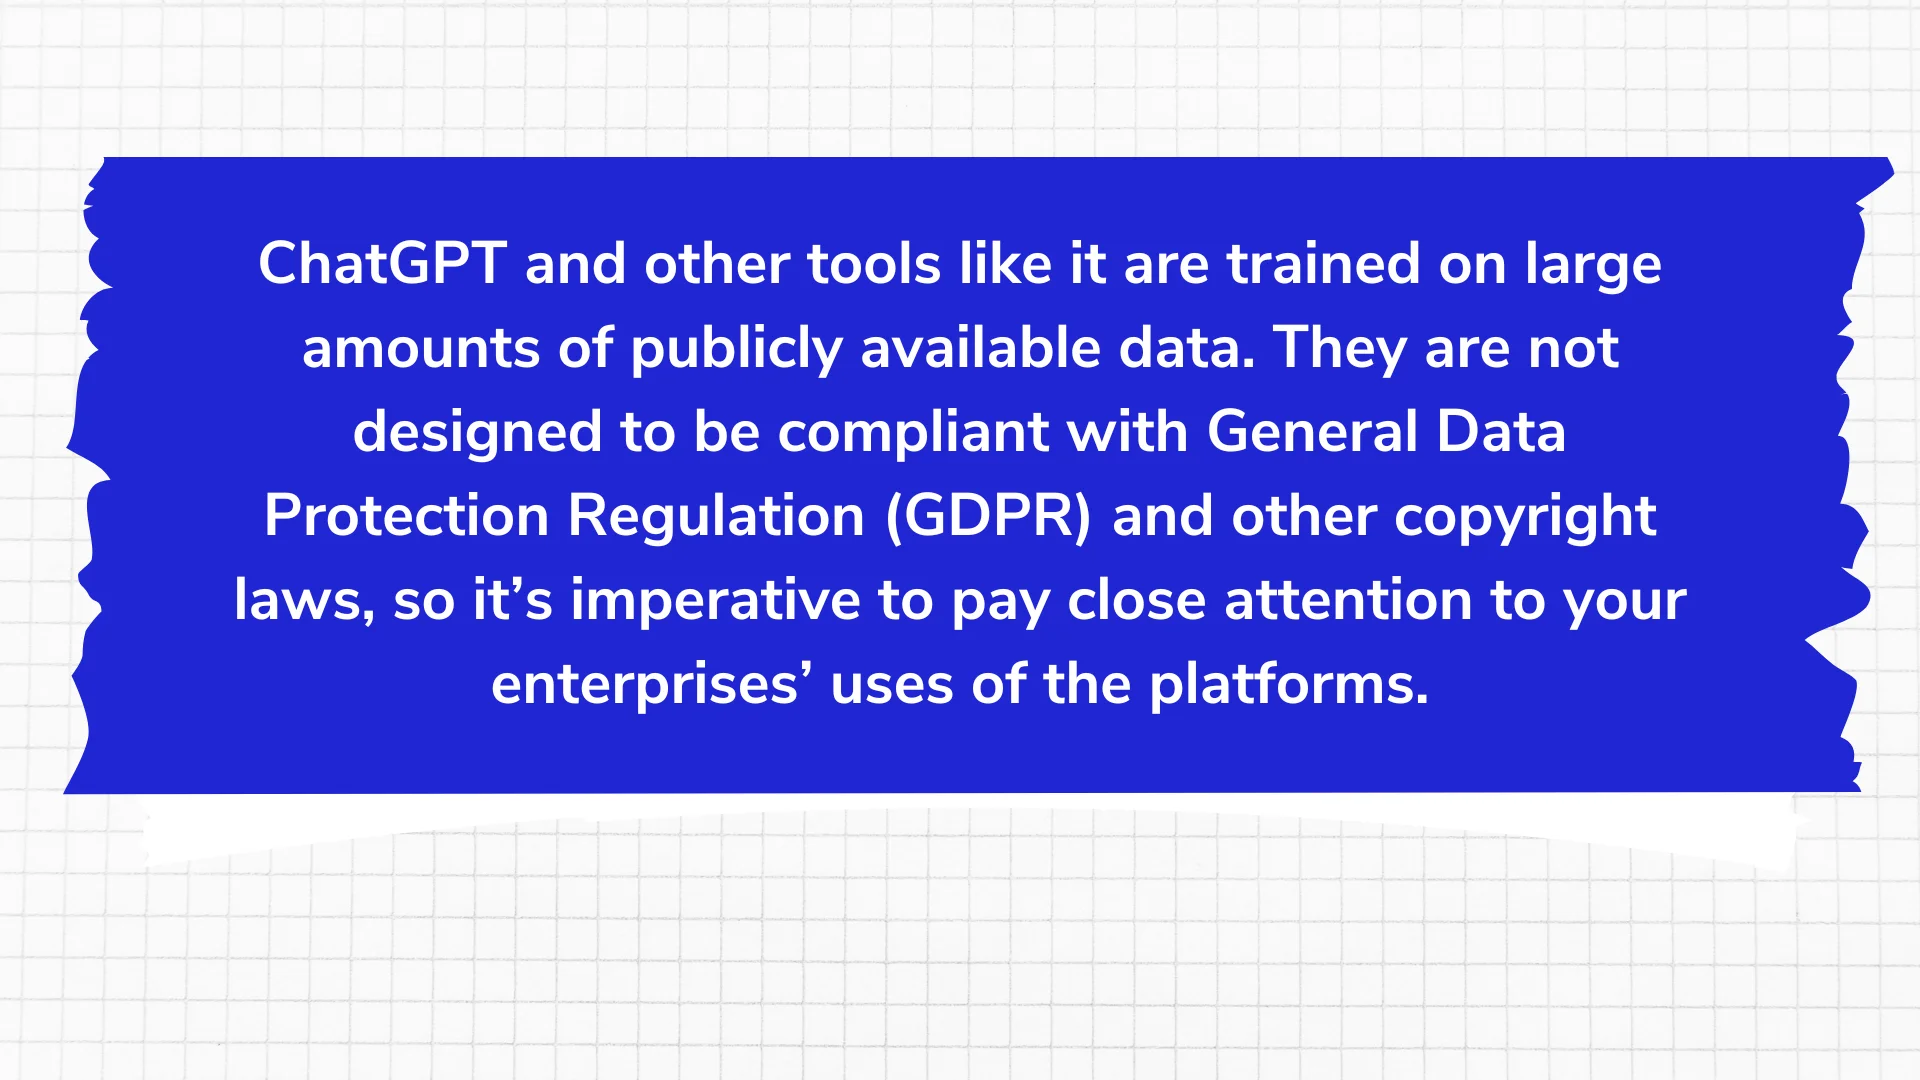 ChatGPT and other tools like it are trained on large amounts of publicly available data